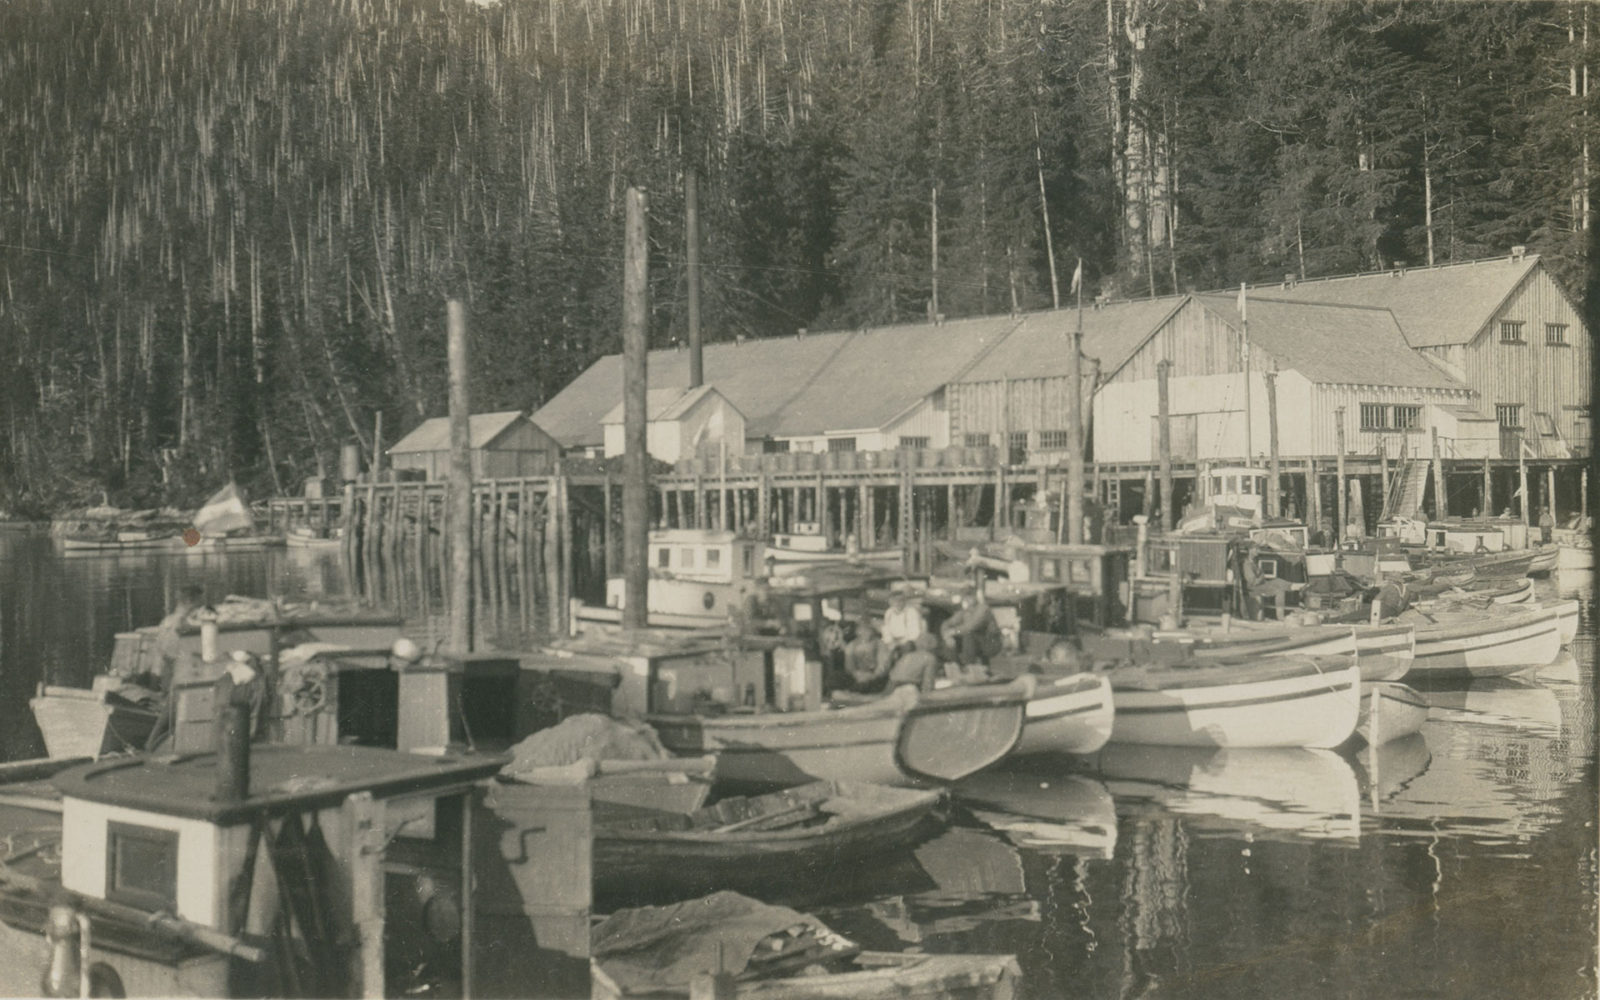 Rivers Inlet Cannery buildings with many boats moored at the wharf in the foreground.